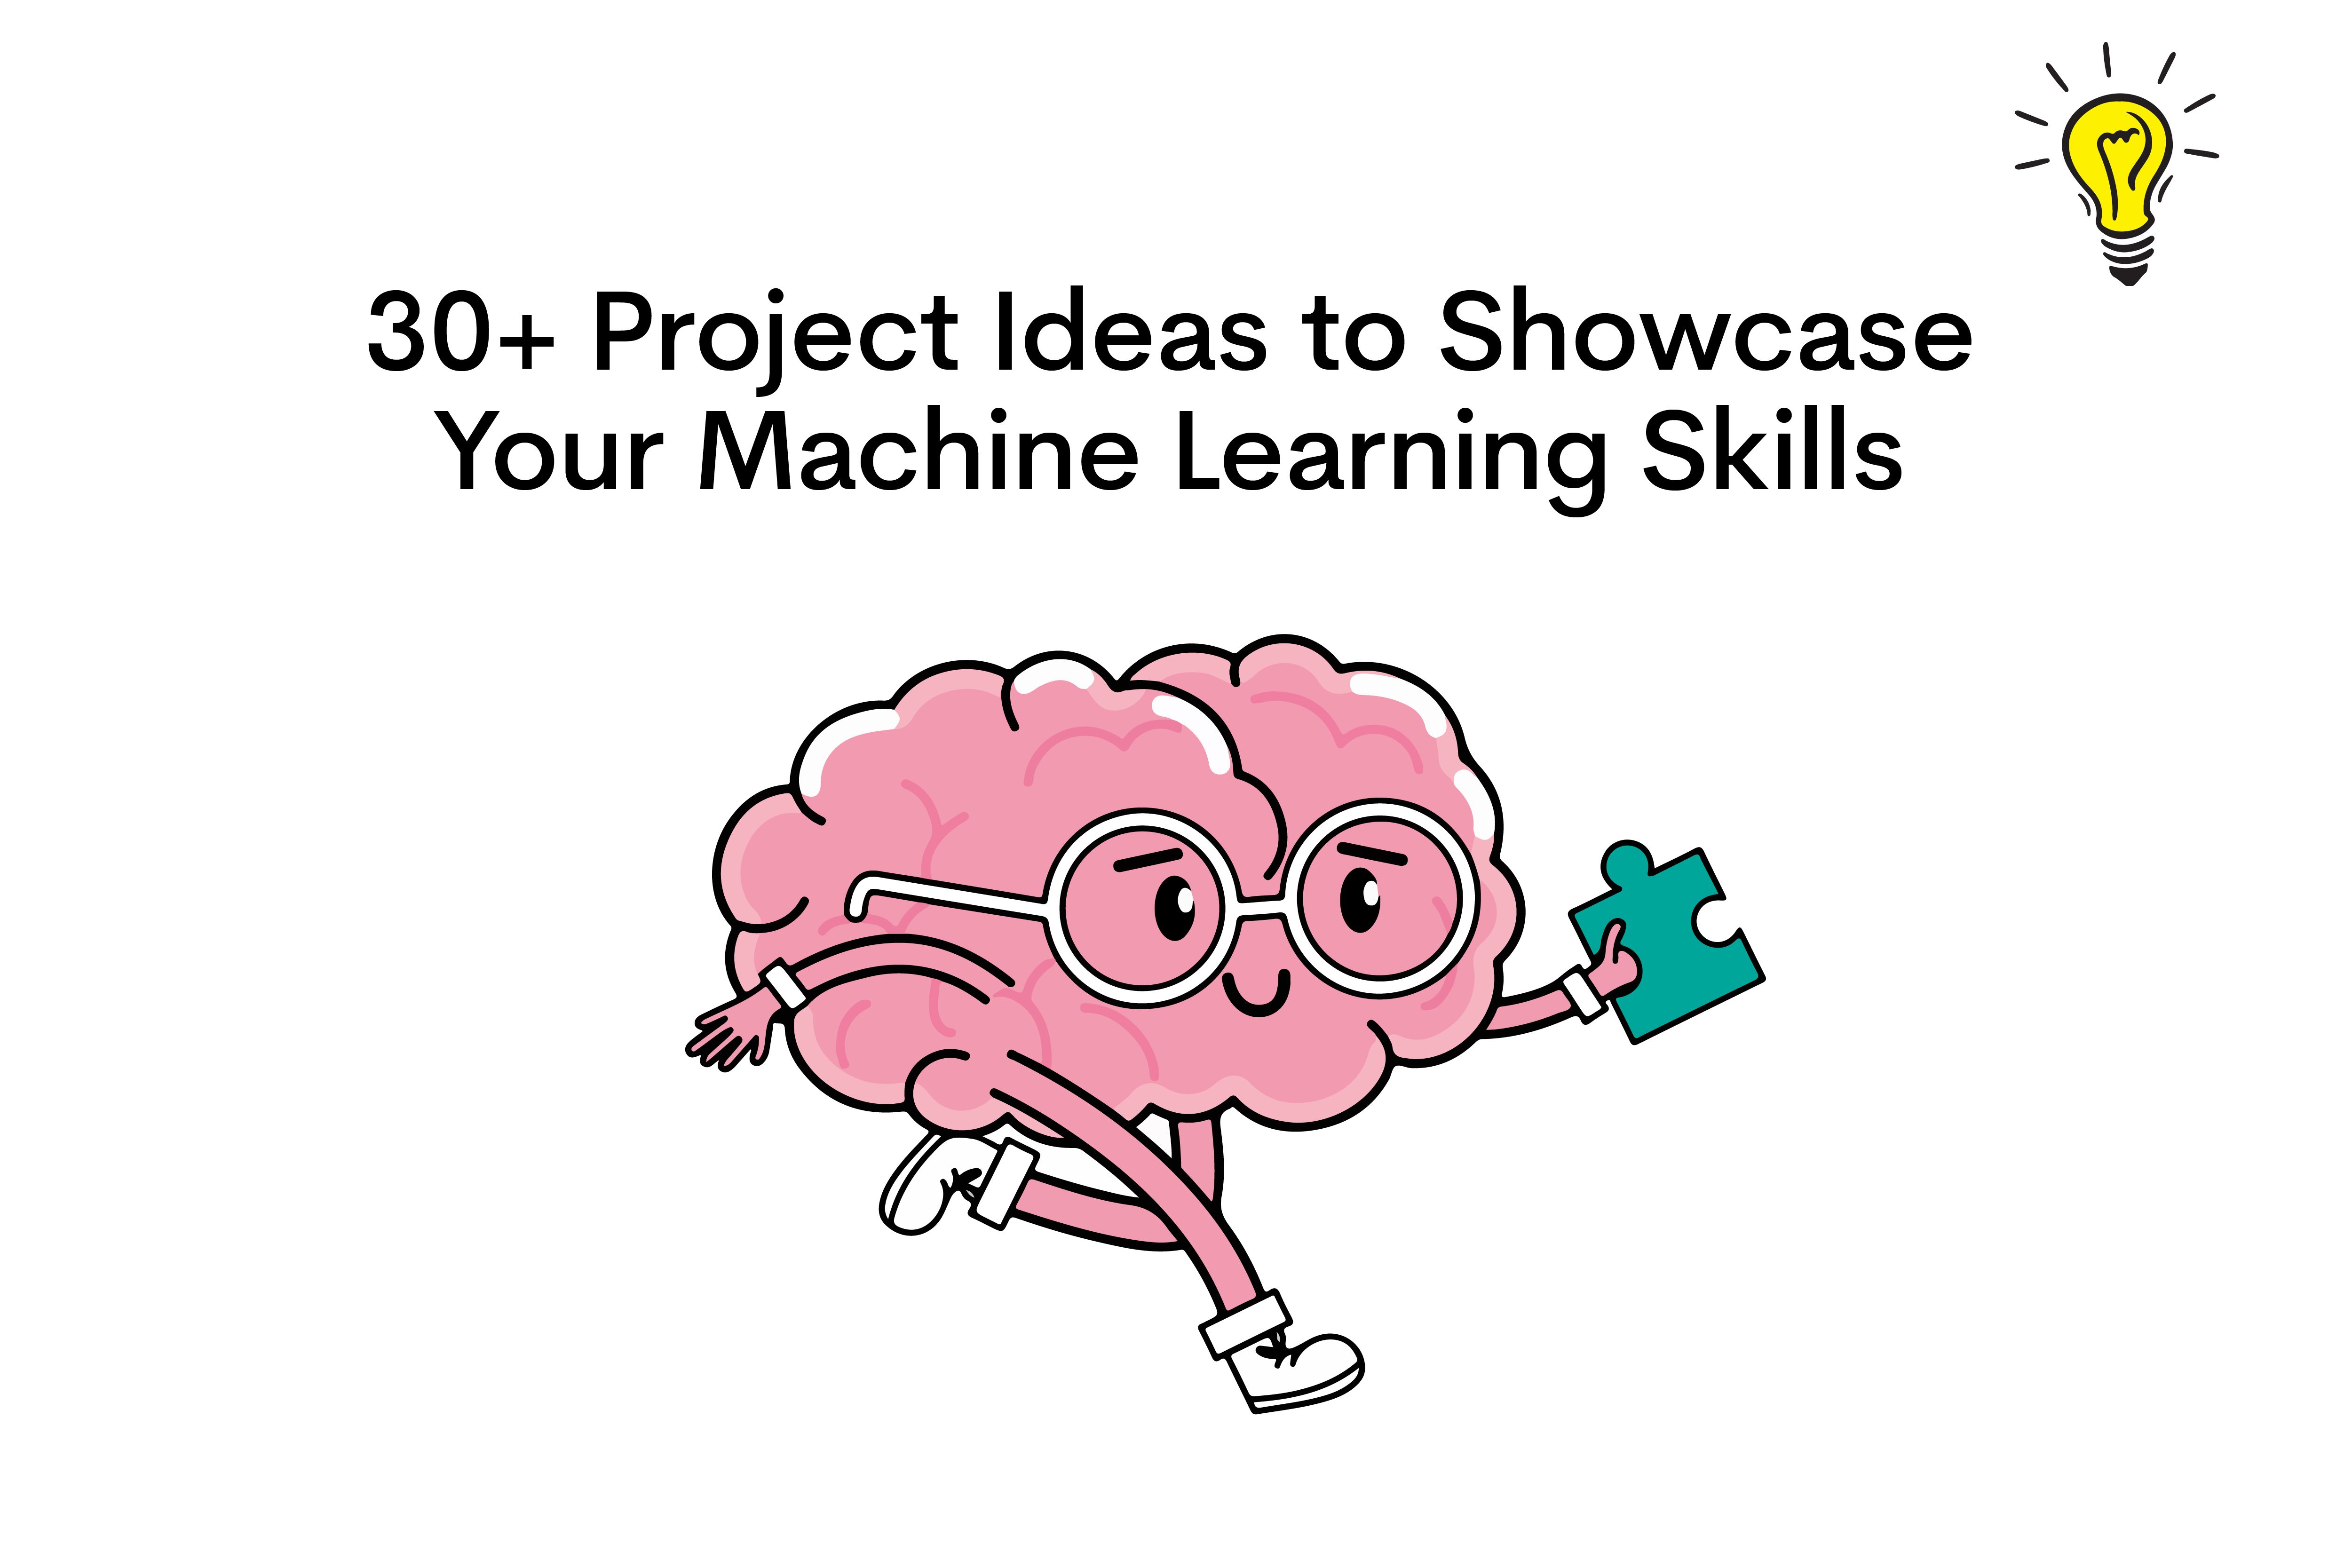 Project Ideas to Showcase Your Machine Learning Skills